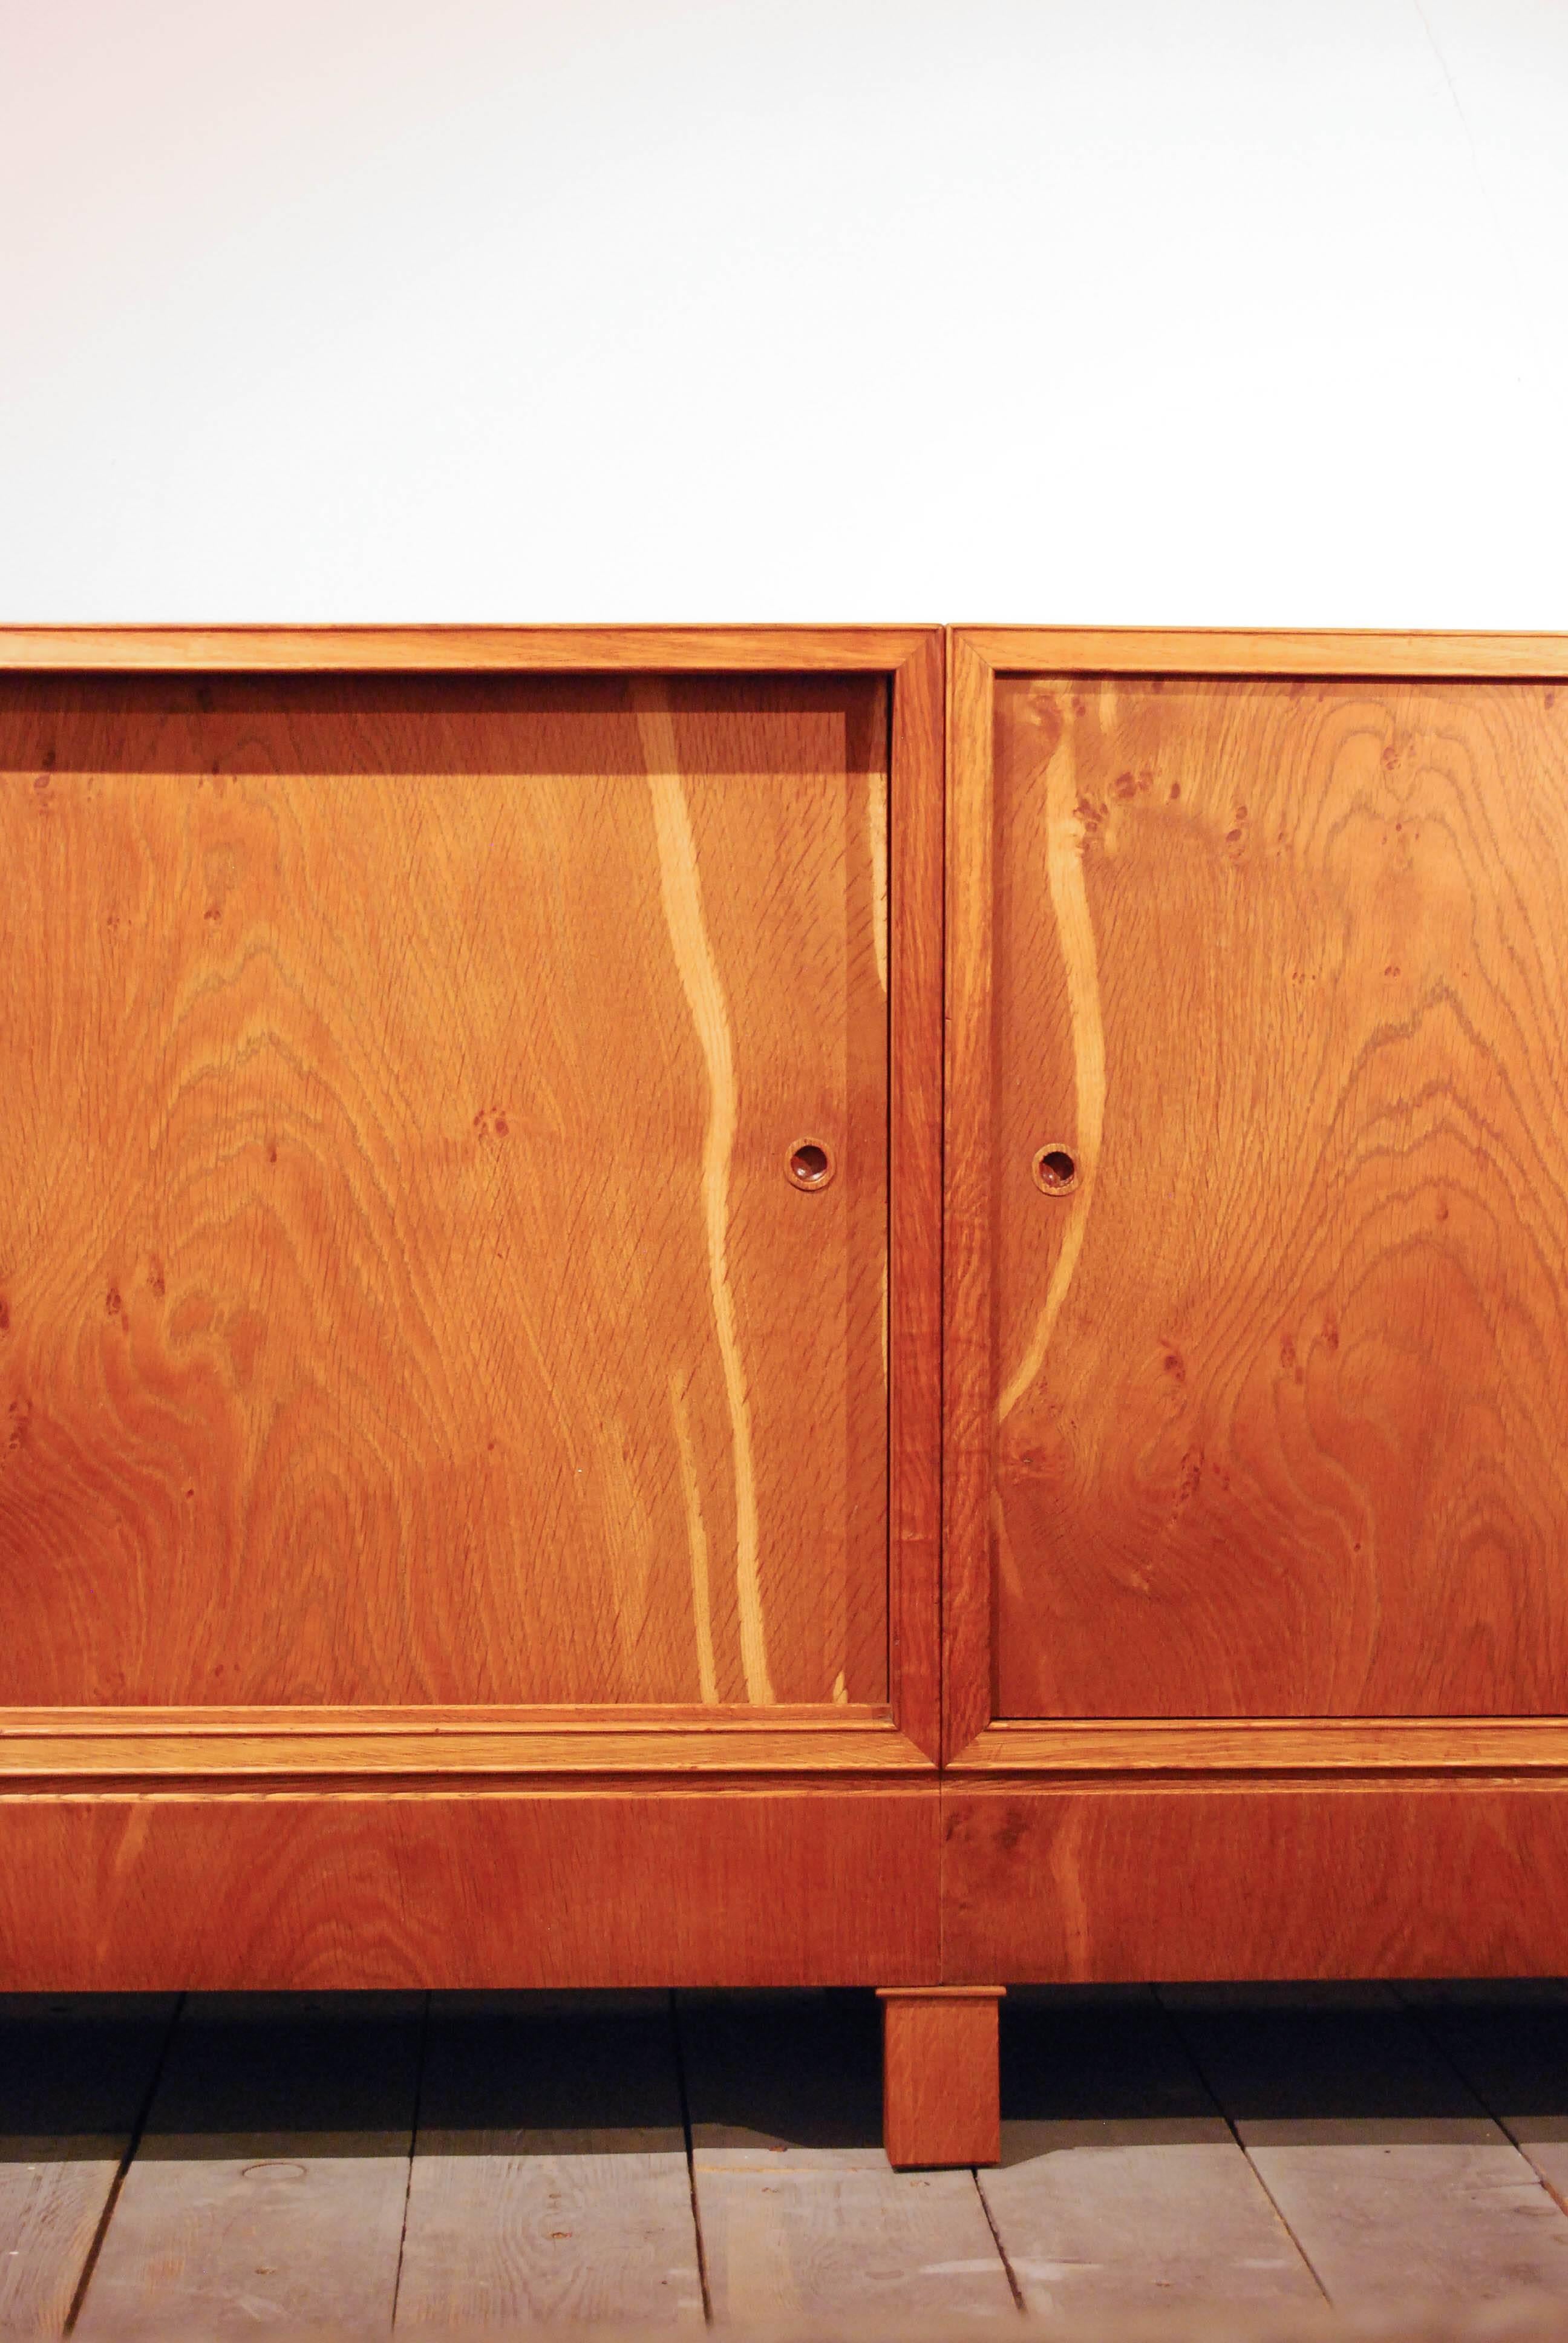 Frits Henningsen was a Danish furniture designer and cabinet maker who achieved high standards of quality with exclusively handmade pieces.

This enfilade includes four sliding doors made in oak.